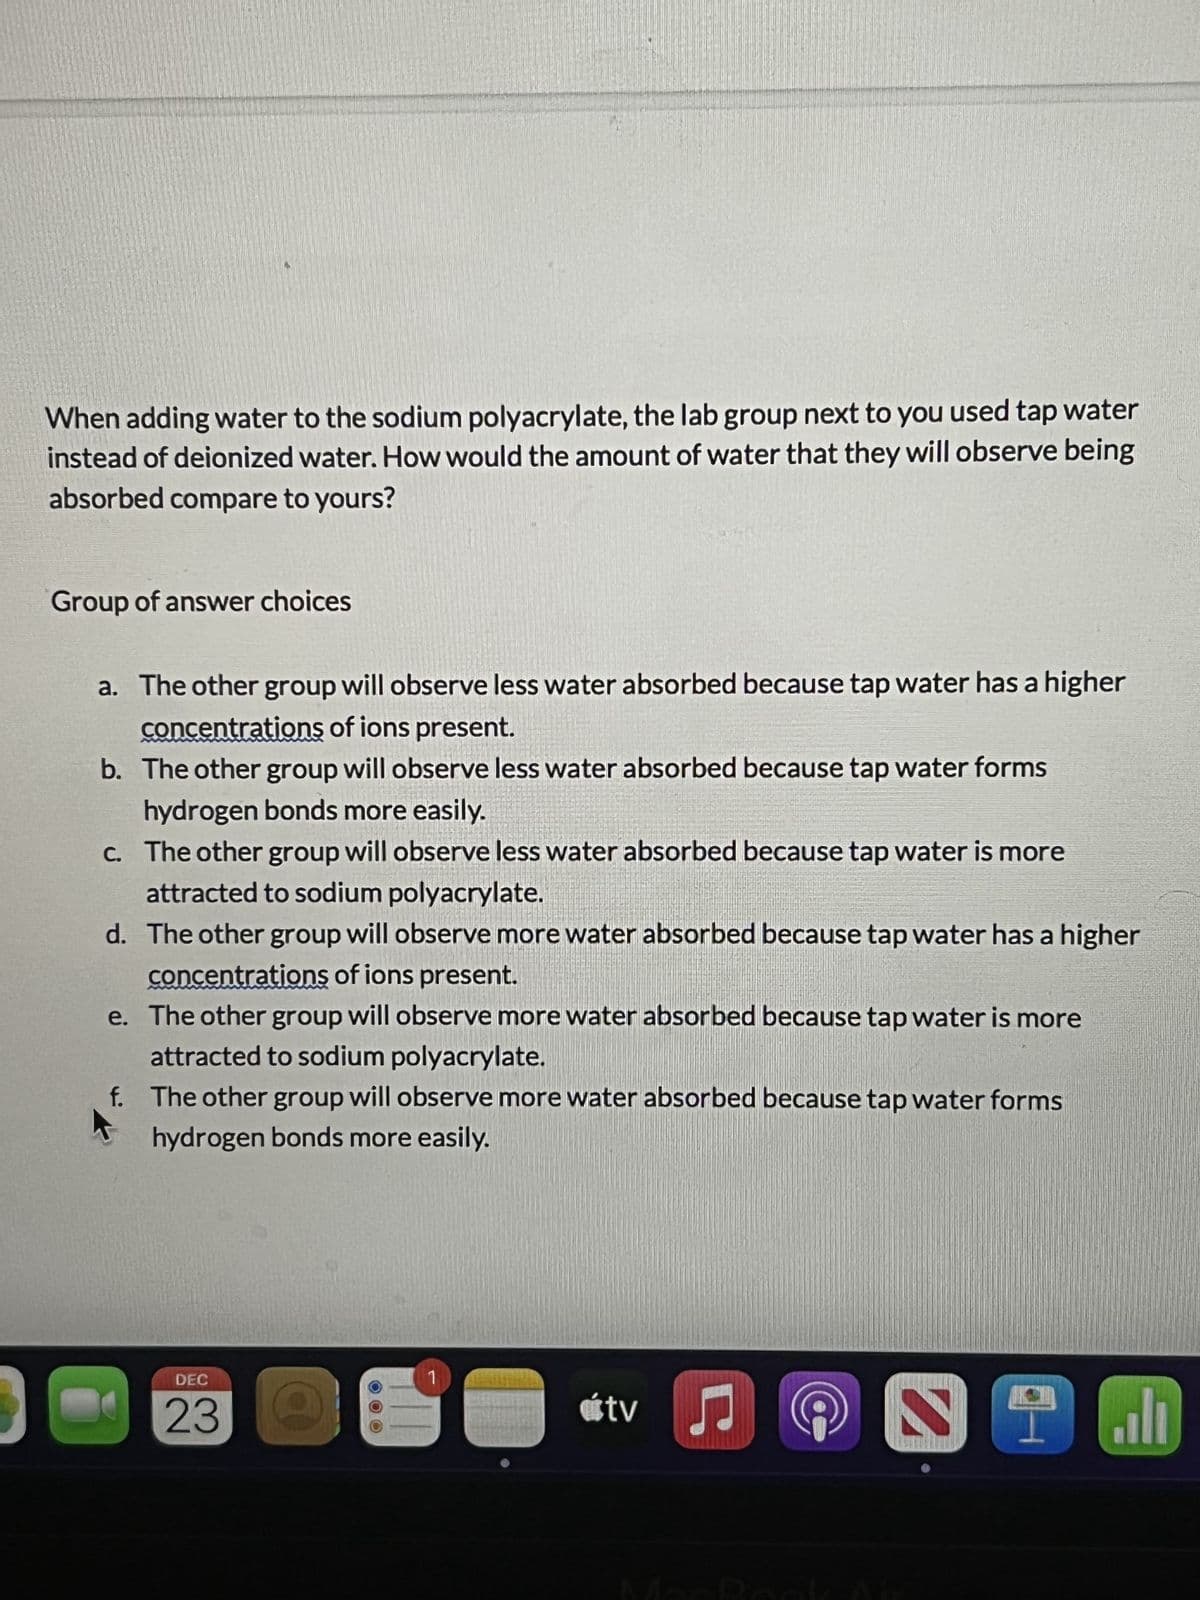 When adding water to the sodium polyacrylate, the lab group next to you used tap water
instead of deionized water. How would the amount of water that they will observe being
absorbed compare to yours?
Group of answer choices
a. The other group will observe less water absorbed because tap water has a higher
concentrations of ions present.
b. The other group will observe less water absorbed because tap water forms
hydrogen bonds more easily.
c. The other group will observe less water absorbed because tap water is more
attracted to sodium polyacrylate.
d. The other group will observe more water absorbed because tap water has a higher
concentrations of ions present.
e. The other group will observe more water absorbed because tap water is more
attracted to sodium polyacrylate.
The other group will observe more water absorbed because tap water forms
hydrogen bonds more easily.
f.
K
DEC
23
útv
♫
ST
اله